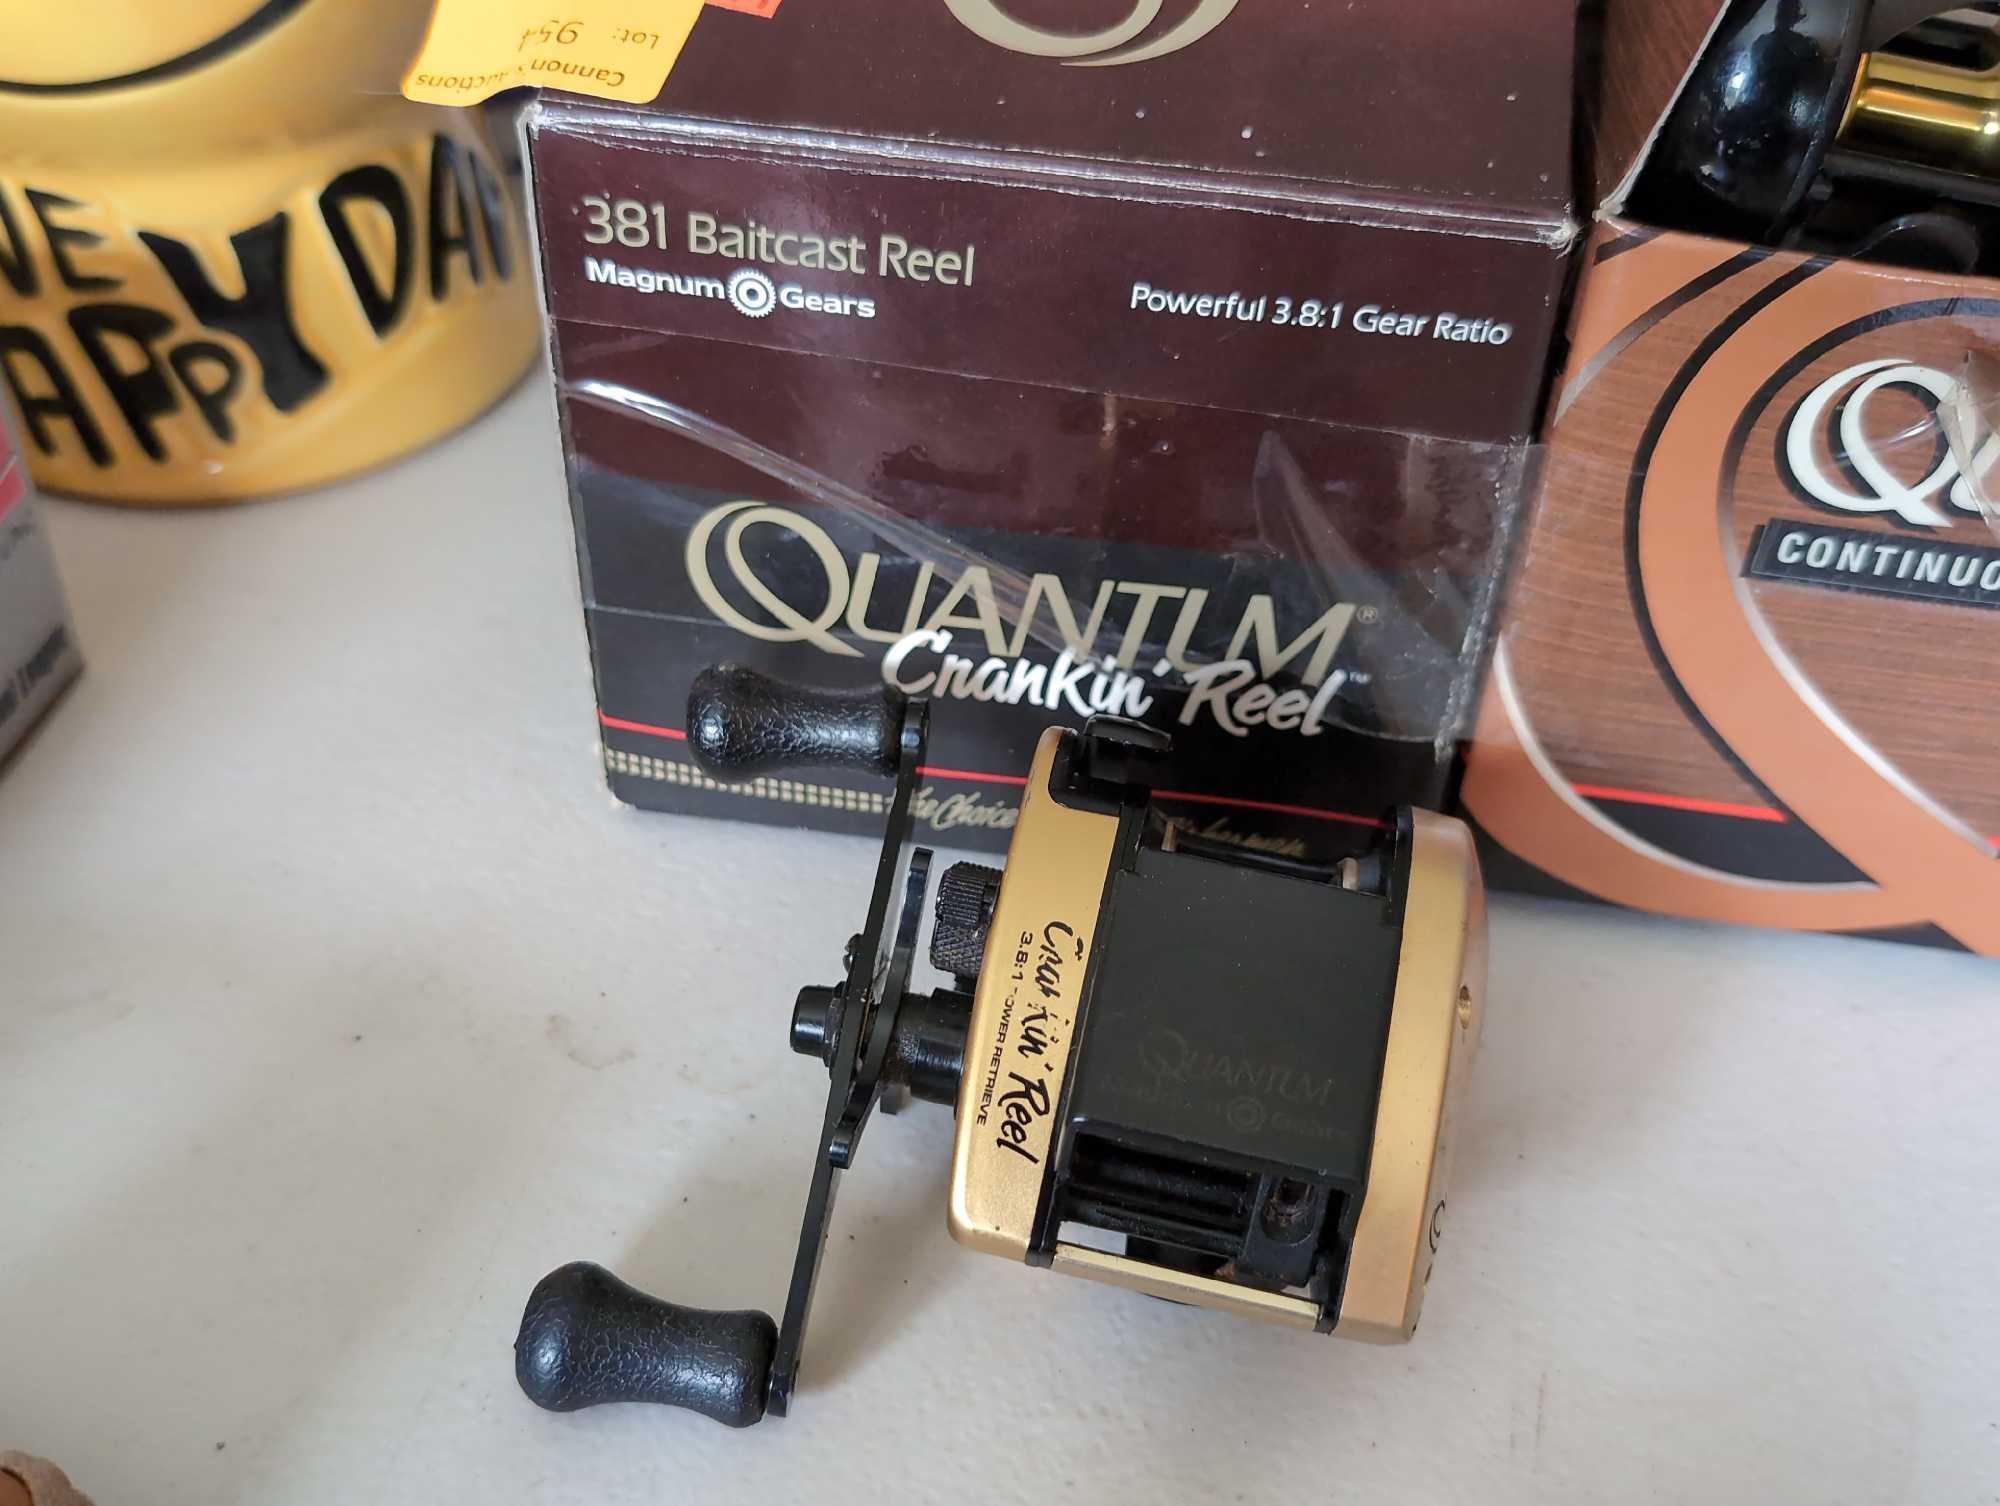 (LR) LOT OF (6) FISHING REELS TO INCLUDE A QUANTUM QMD25 SPINNING REEL, A ZEBCO STERLING 7025